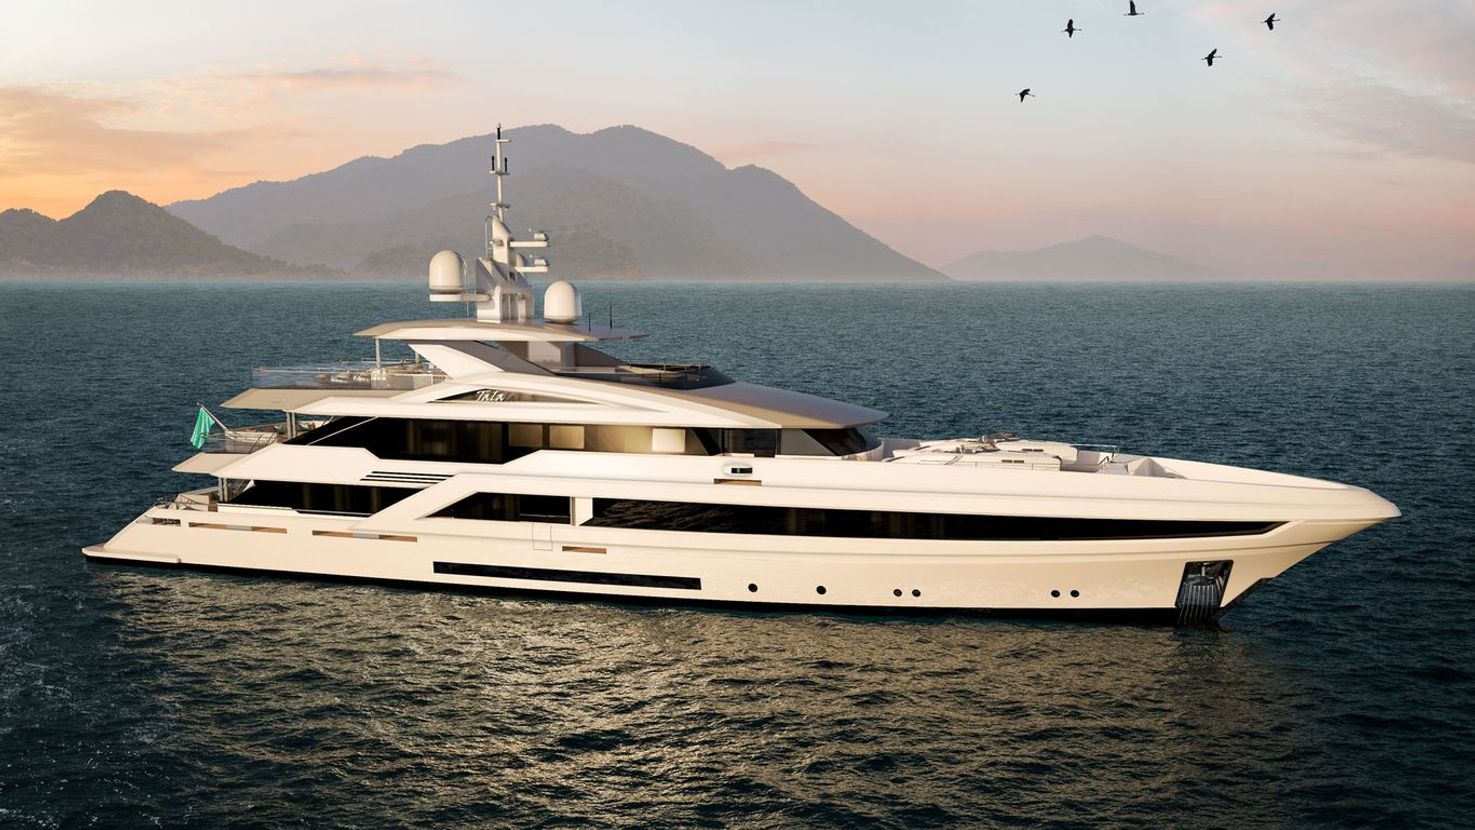 Superyacht ‘Project Tala’ ready for outfitting Yacht Charter Fleet